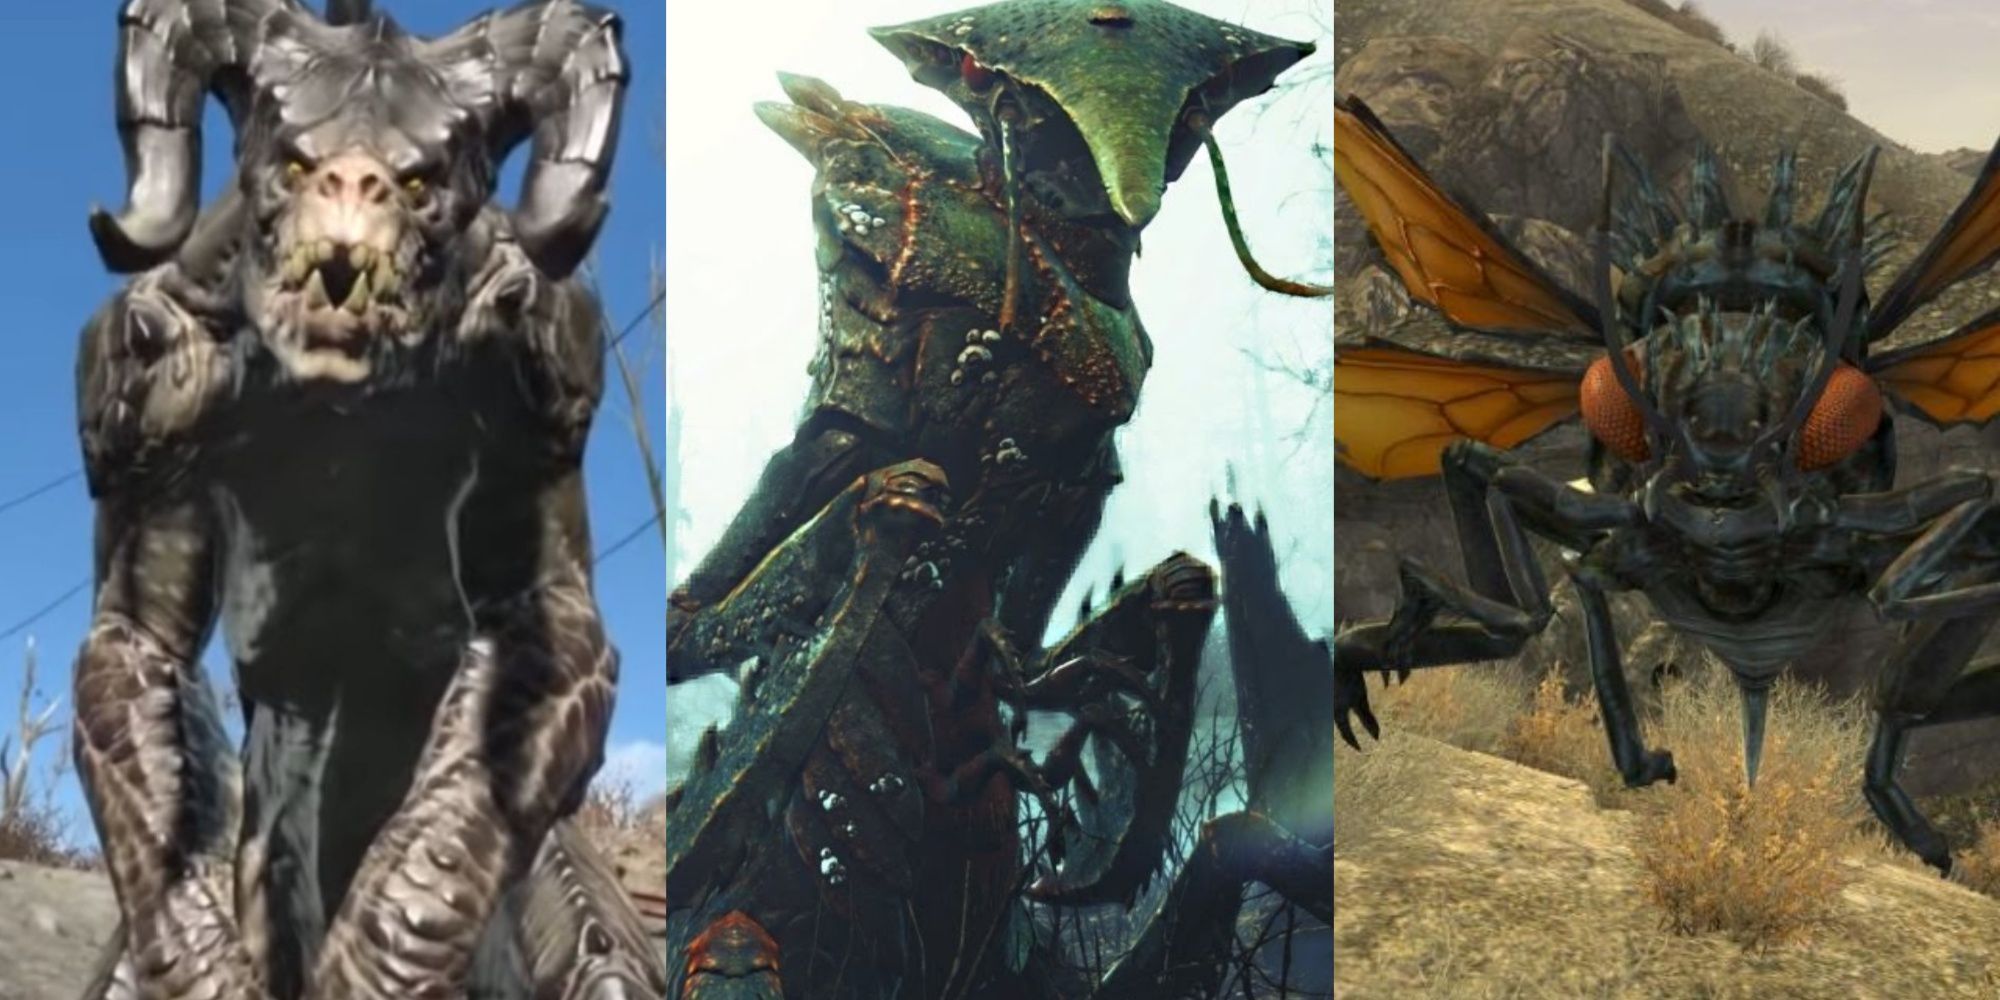 Split images of the Deathclaw, Fog Crawler, and Cazador monsters in the Fallout series